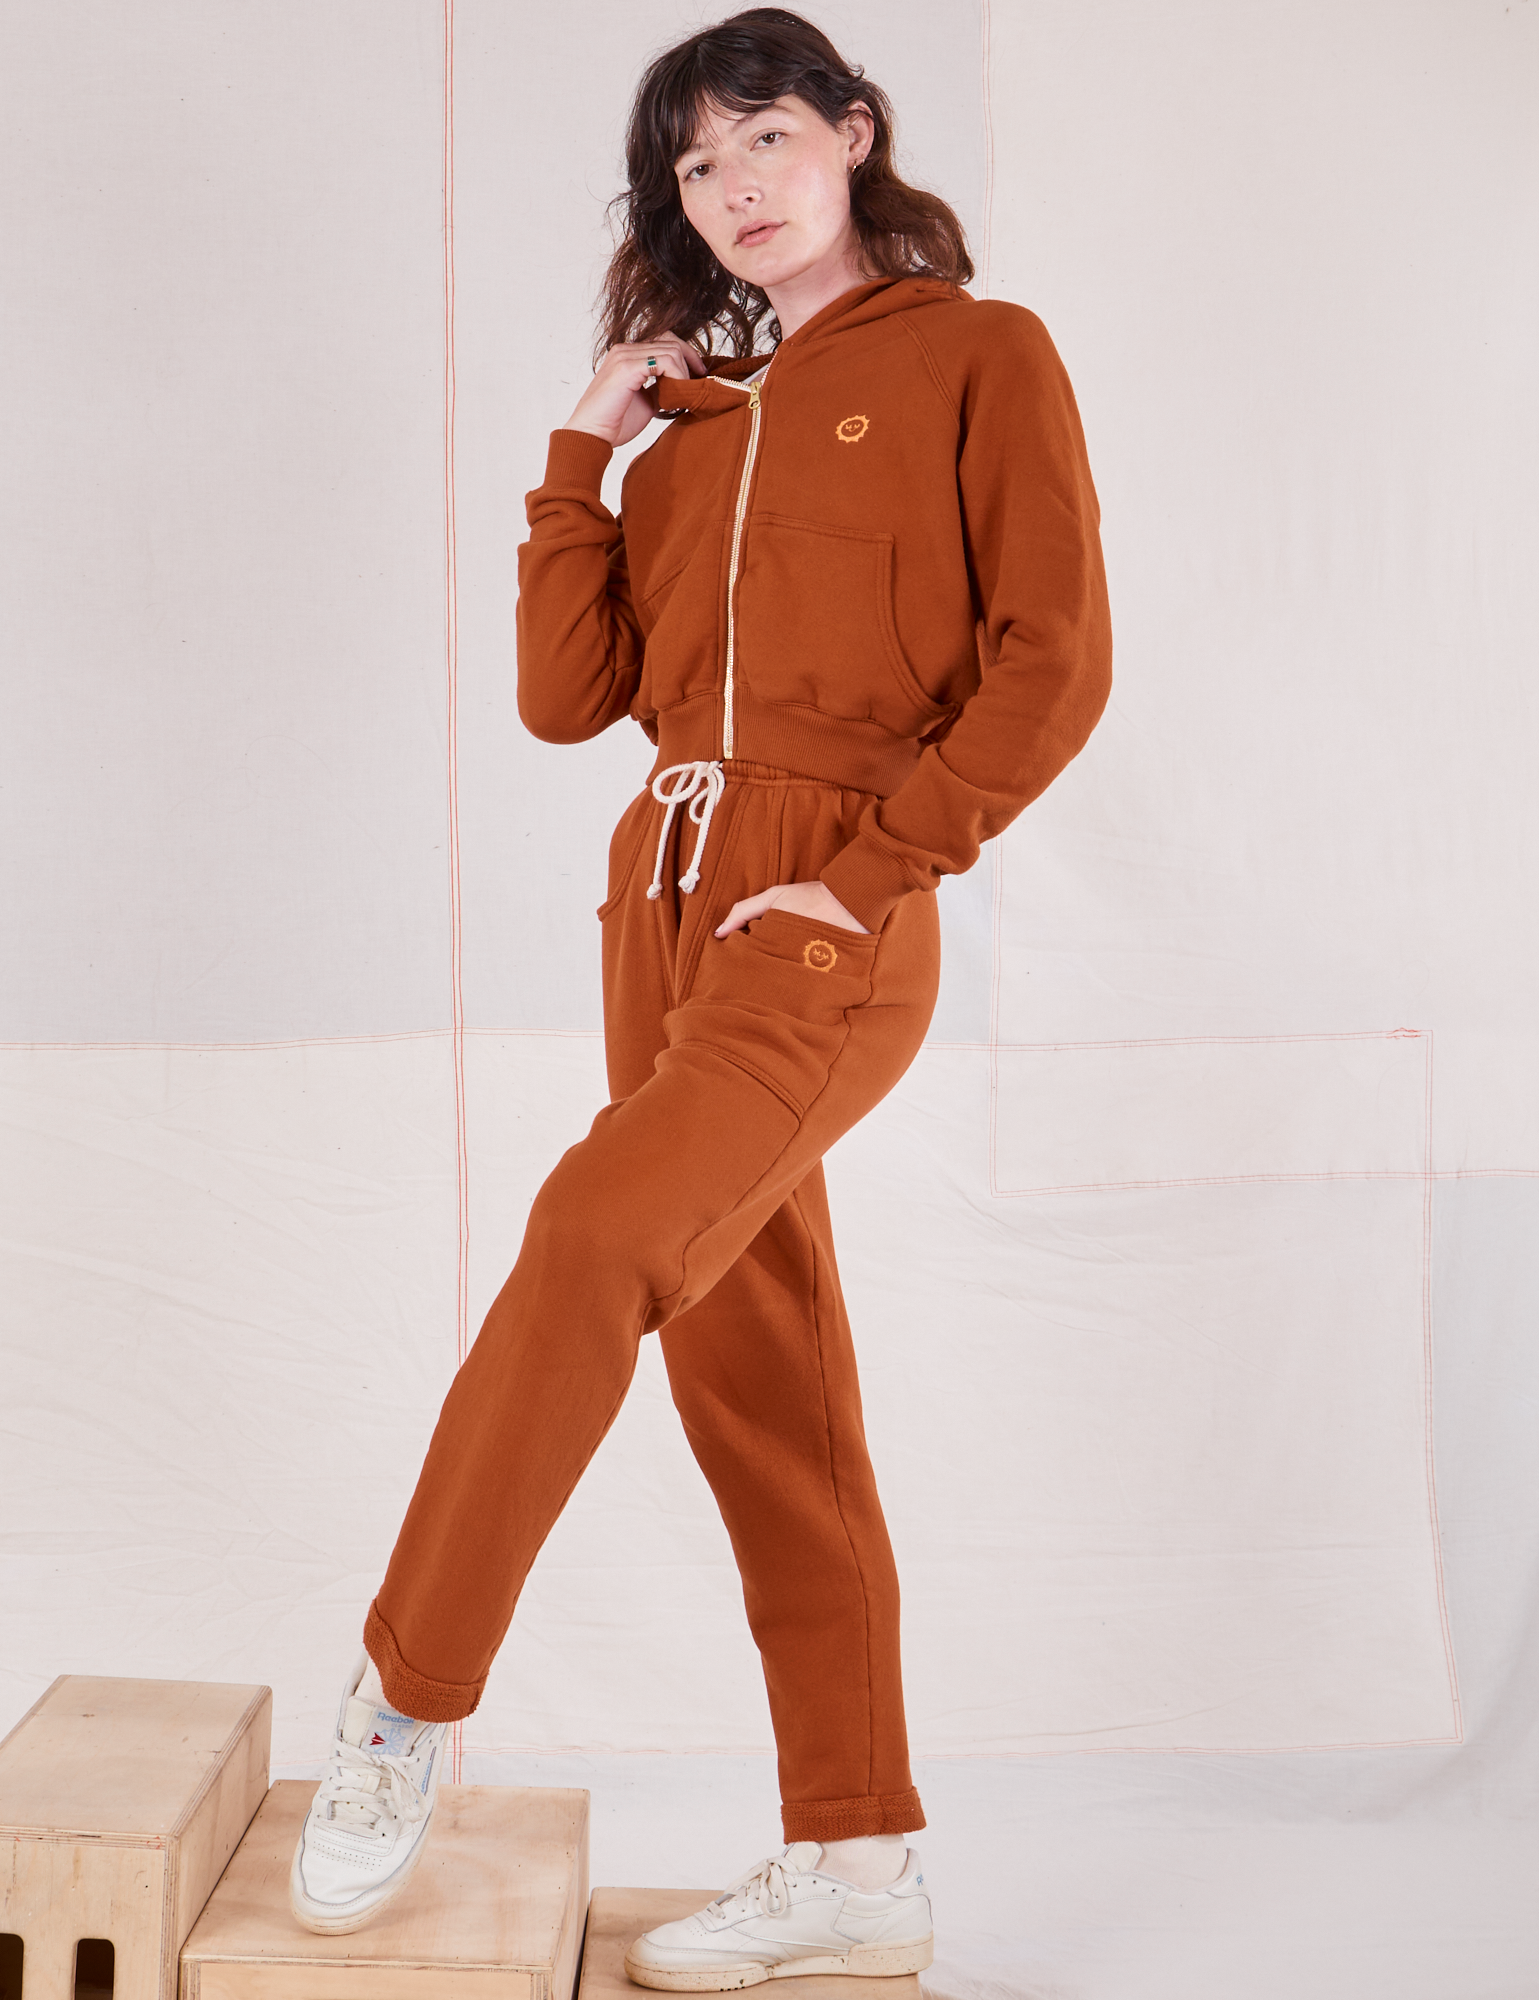 Alex is wearing Rolled Cuff Sweat Pants in Burnt Terracotta and matching Cropped Zip Hoodie